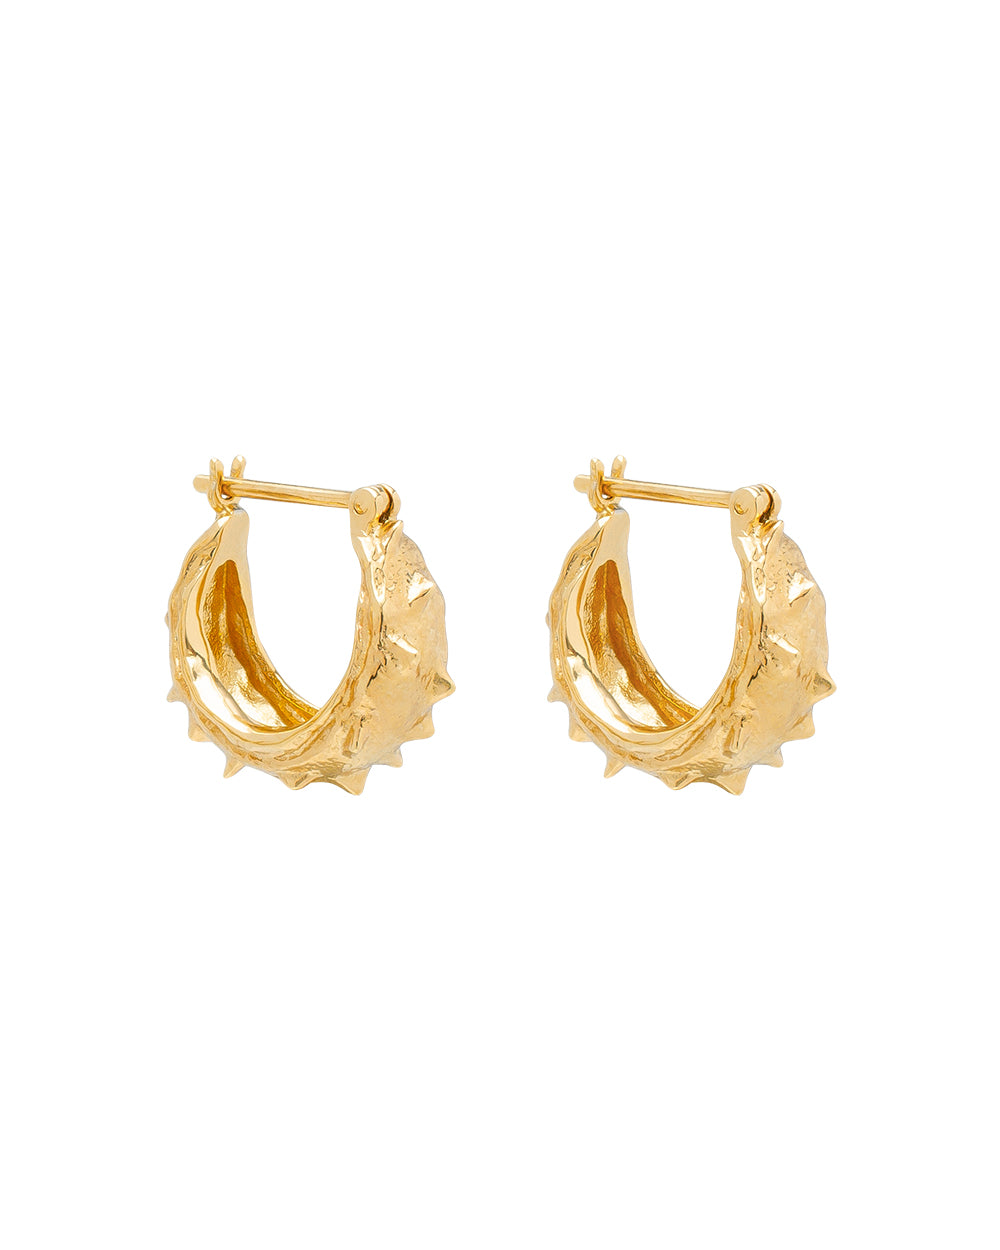 K17 Chestnut skin earrings made of brass plated with 24K gold